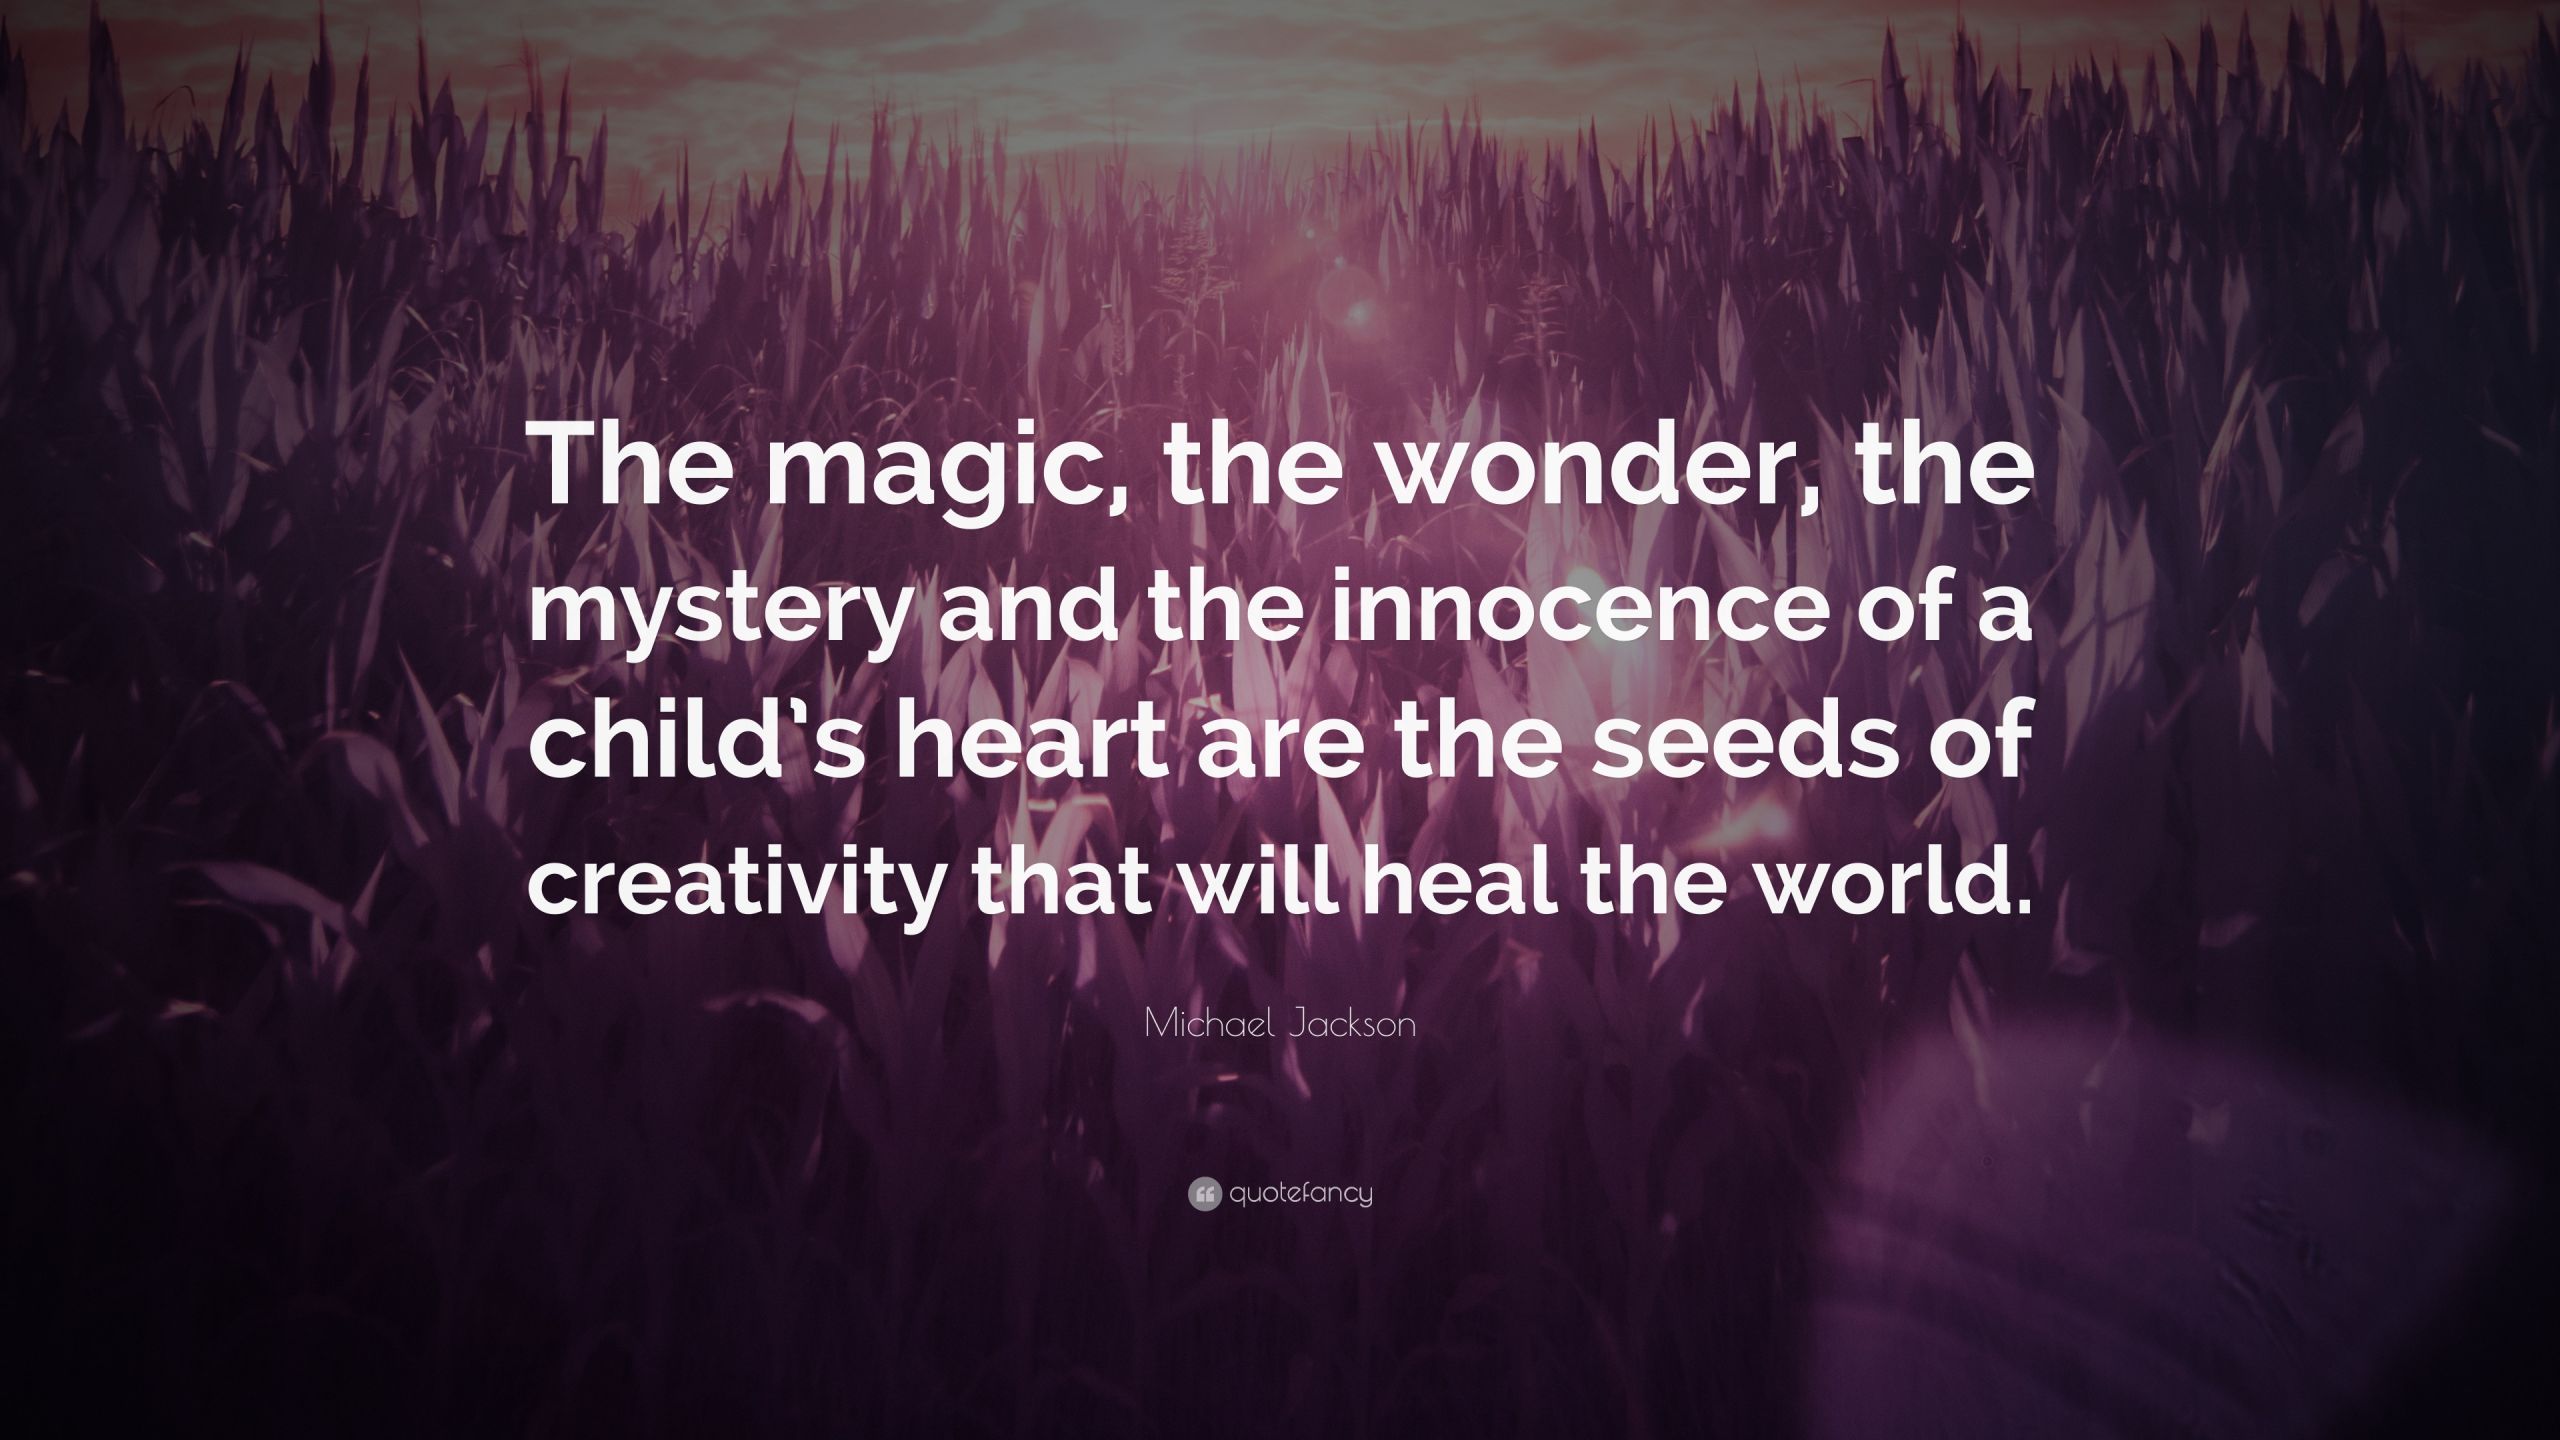 The Innocence Of A Child Quotes
 Creativity Quotes 57 wallpapers Quotefancy